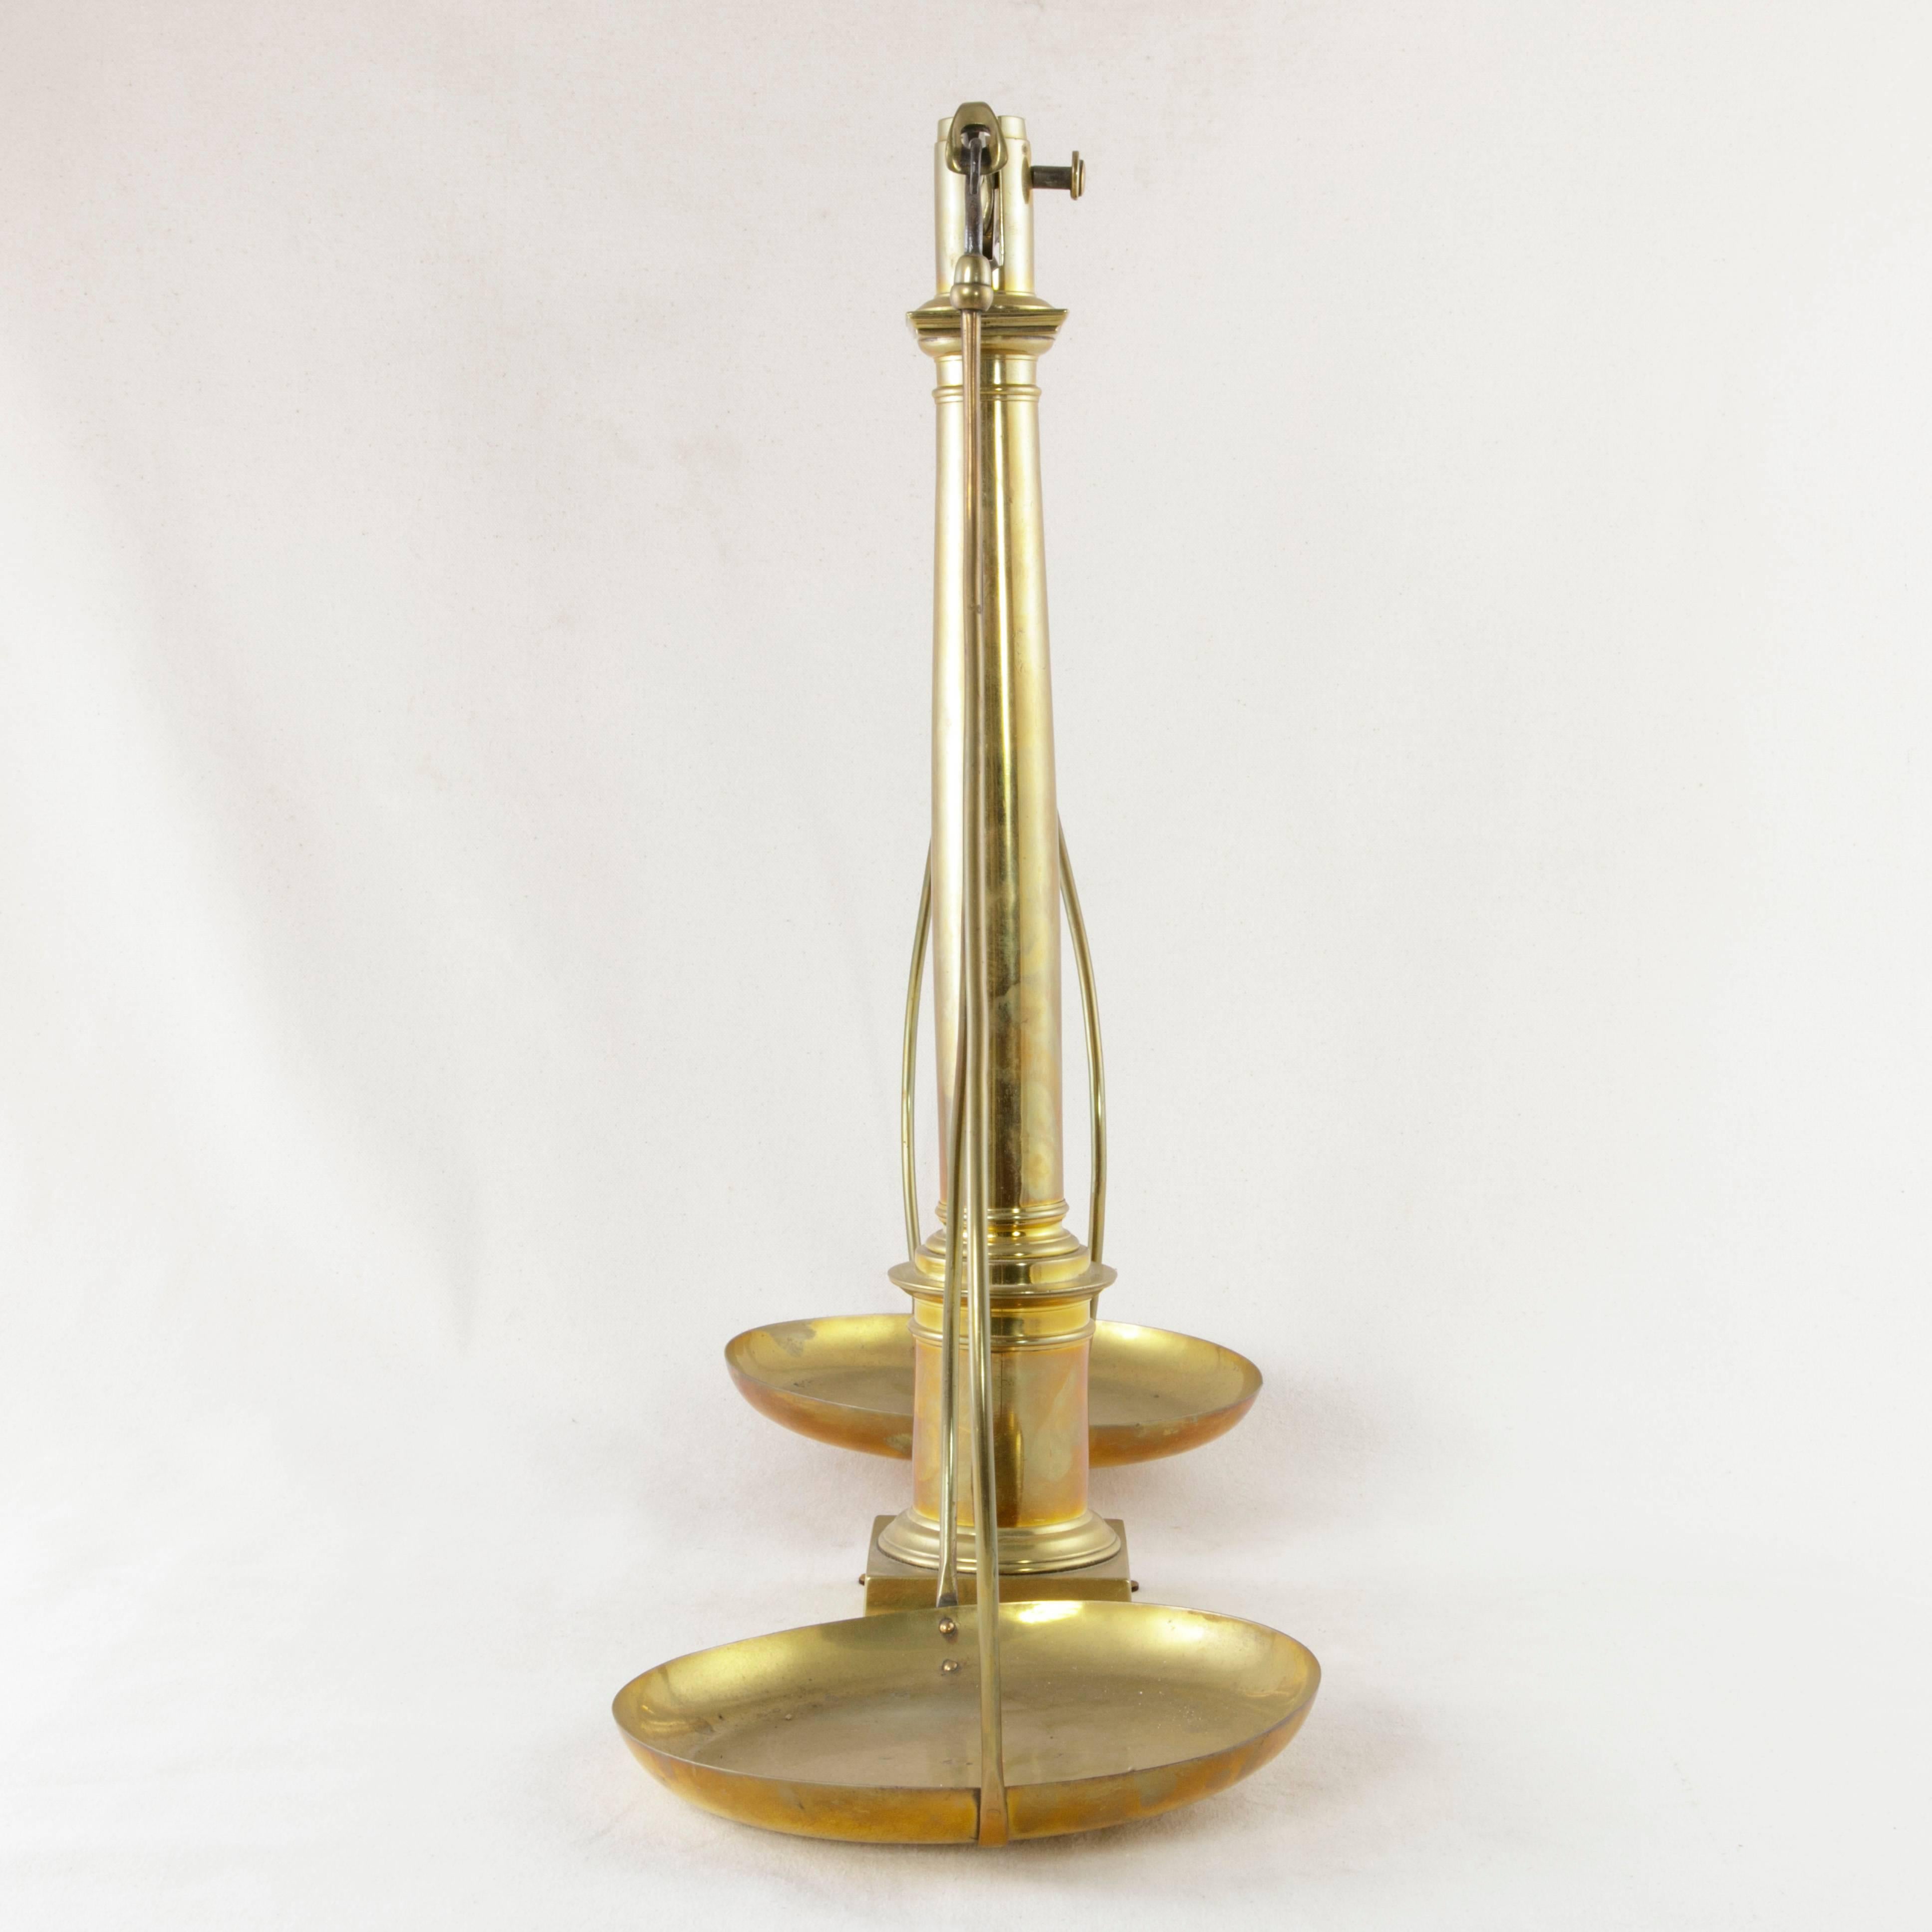 French Set of 19th Century Empire Period Bronze Pharmacy Scales c. 1804-1815